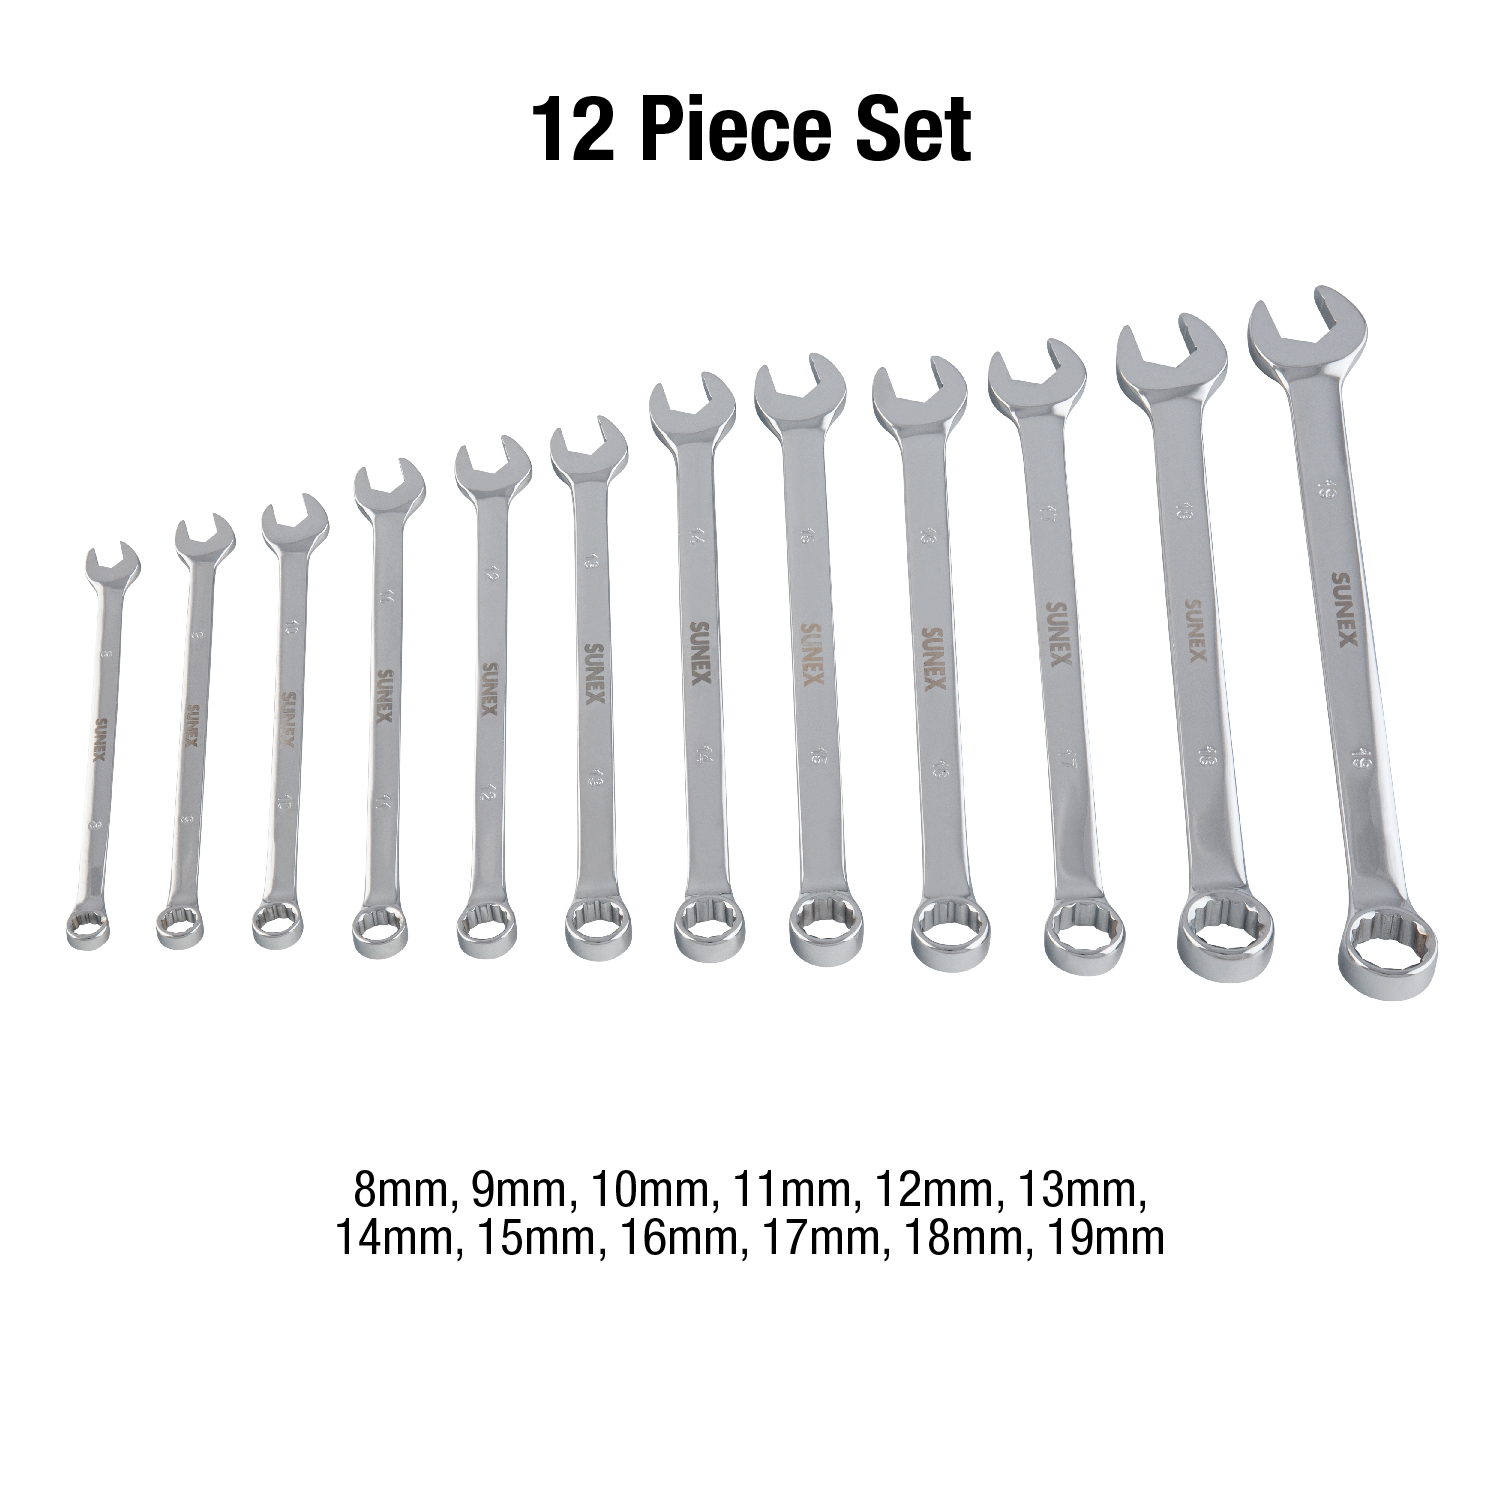 12 Piece Metric Full Polished V-Groove Combination Wrench Set